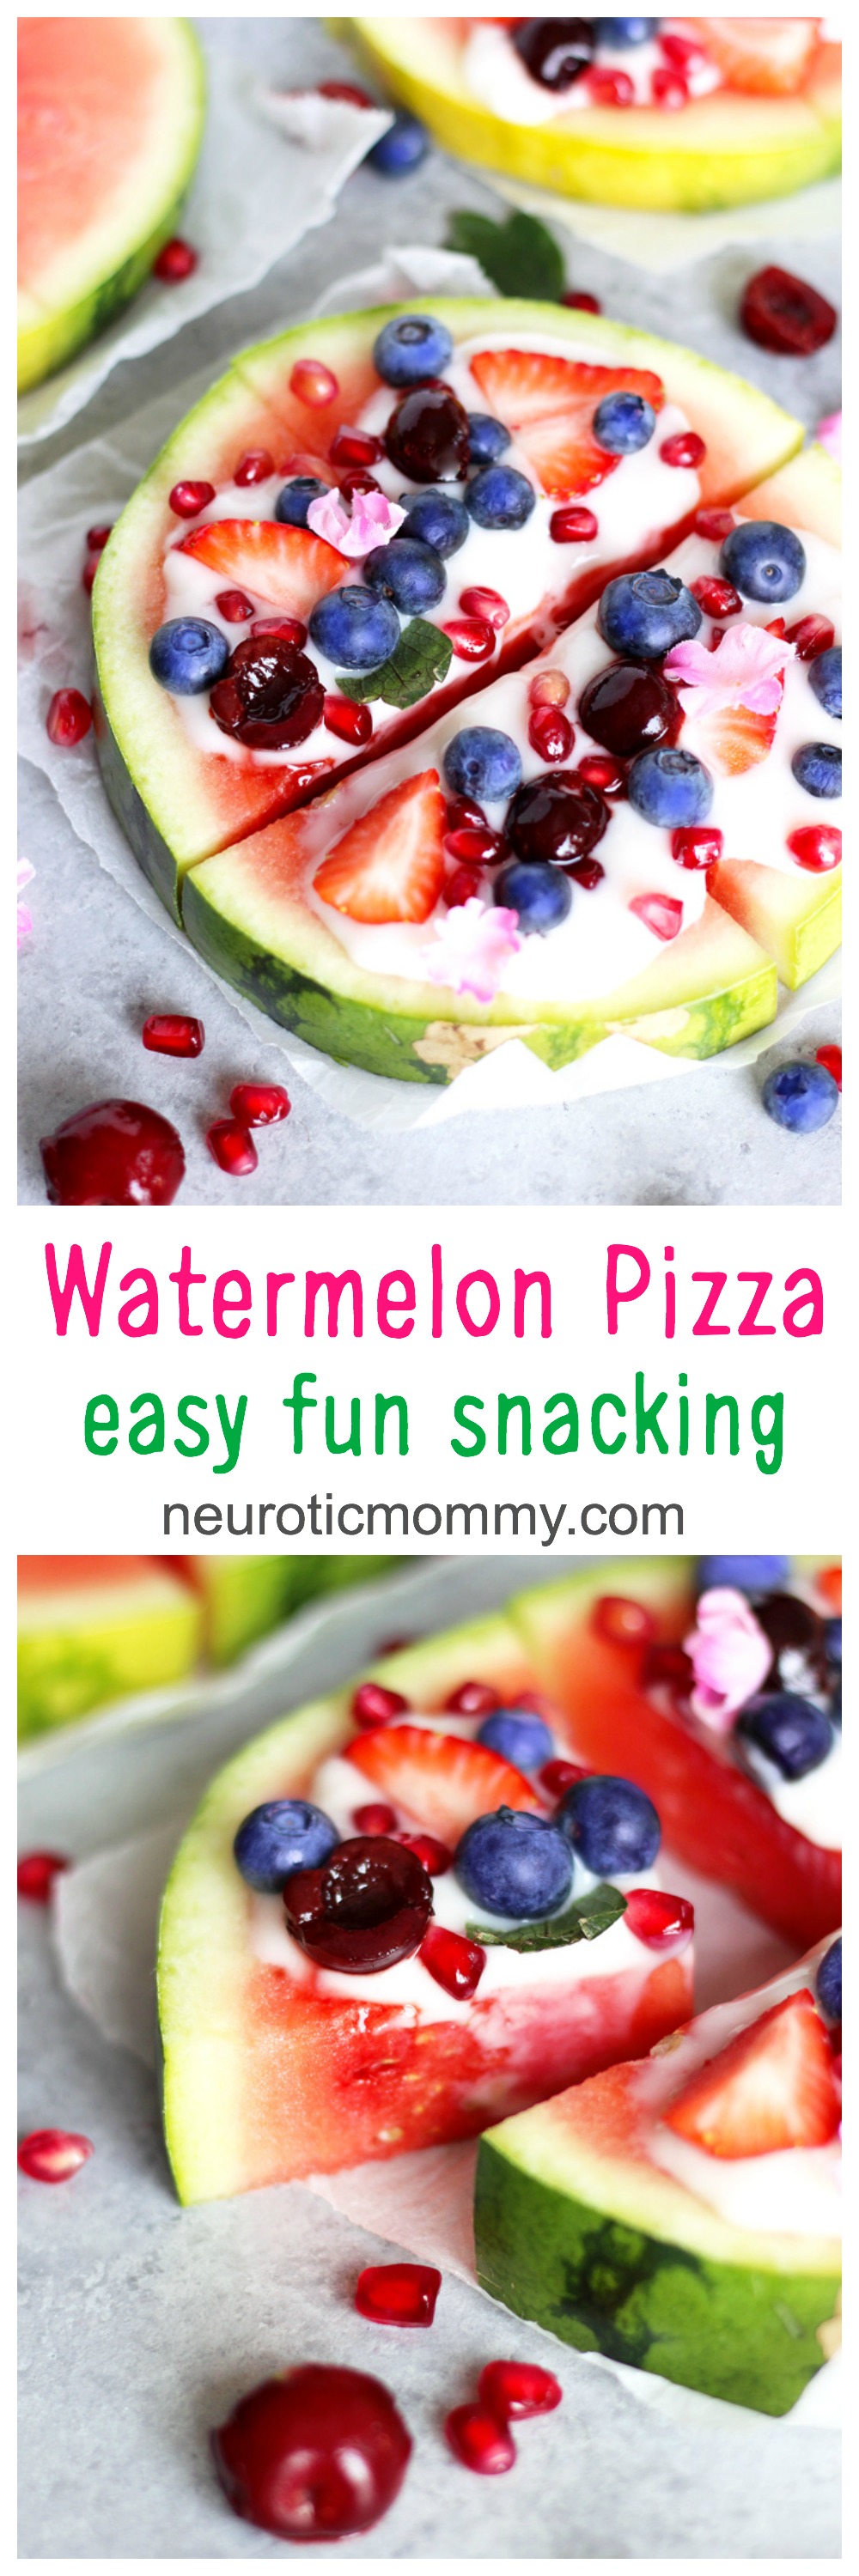 Watermelon Pizza - Easy Fun Snacking because snacks shouldn't be a crime! Enjoy this nutritious and fun treat without the guilt. NeuroticMommy.com #snacks #health #plantbased